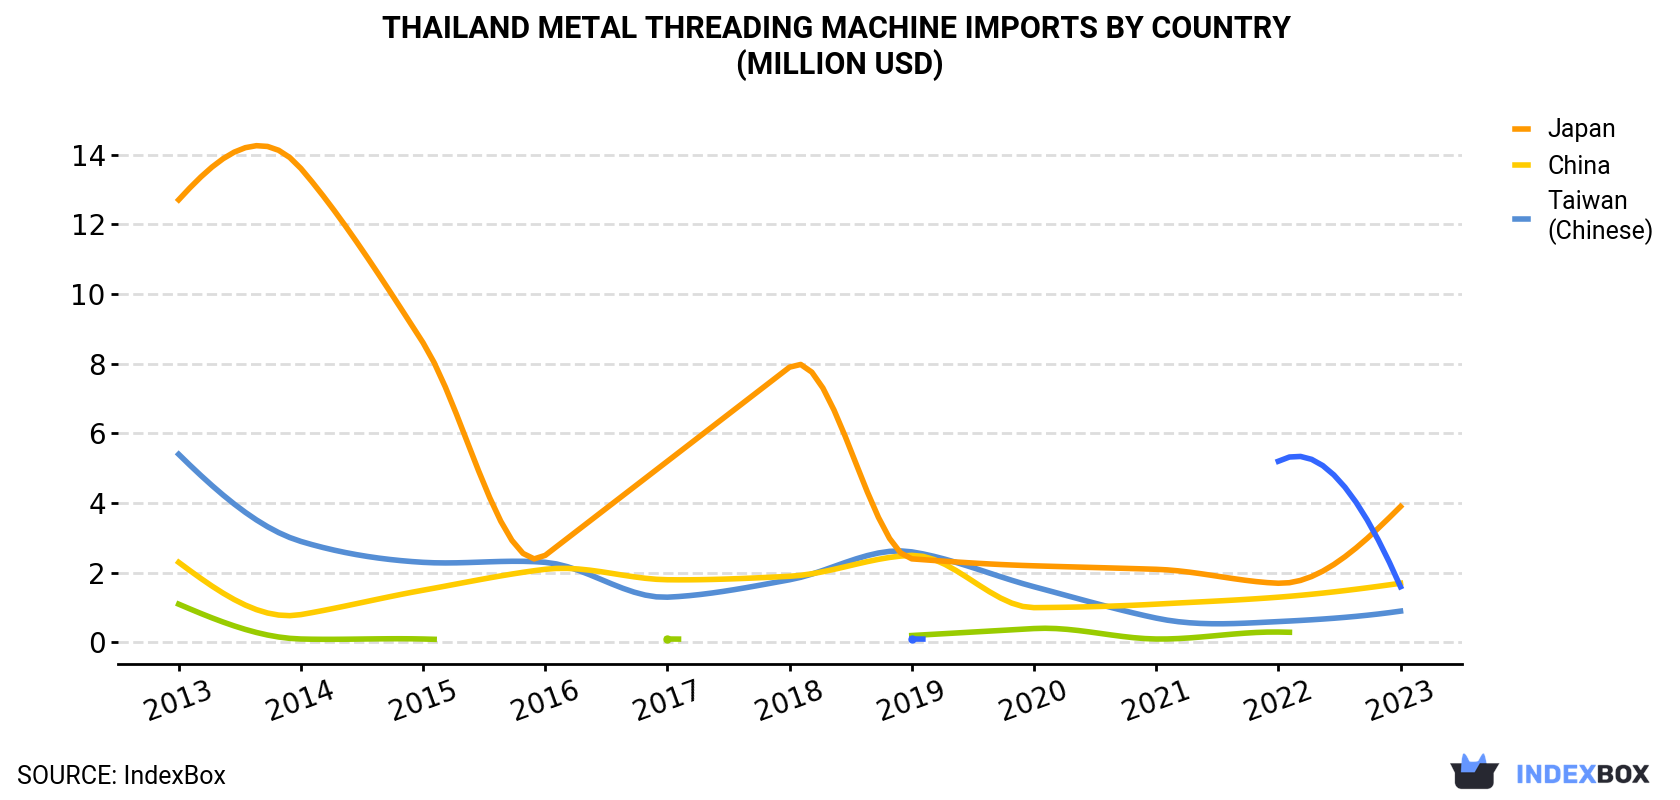 Thailand Metal Threading Machine Imports By Country (Million USD)